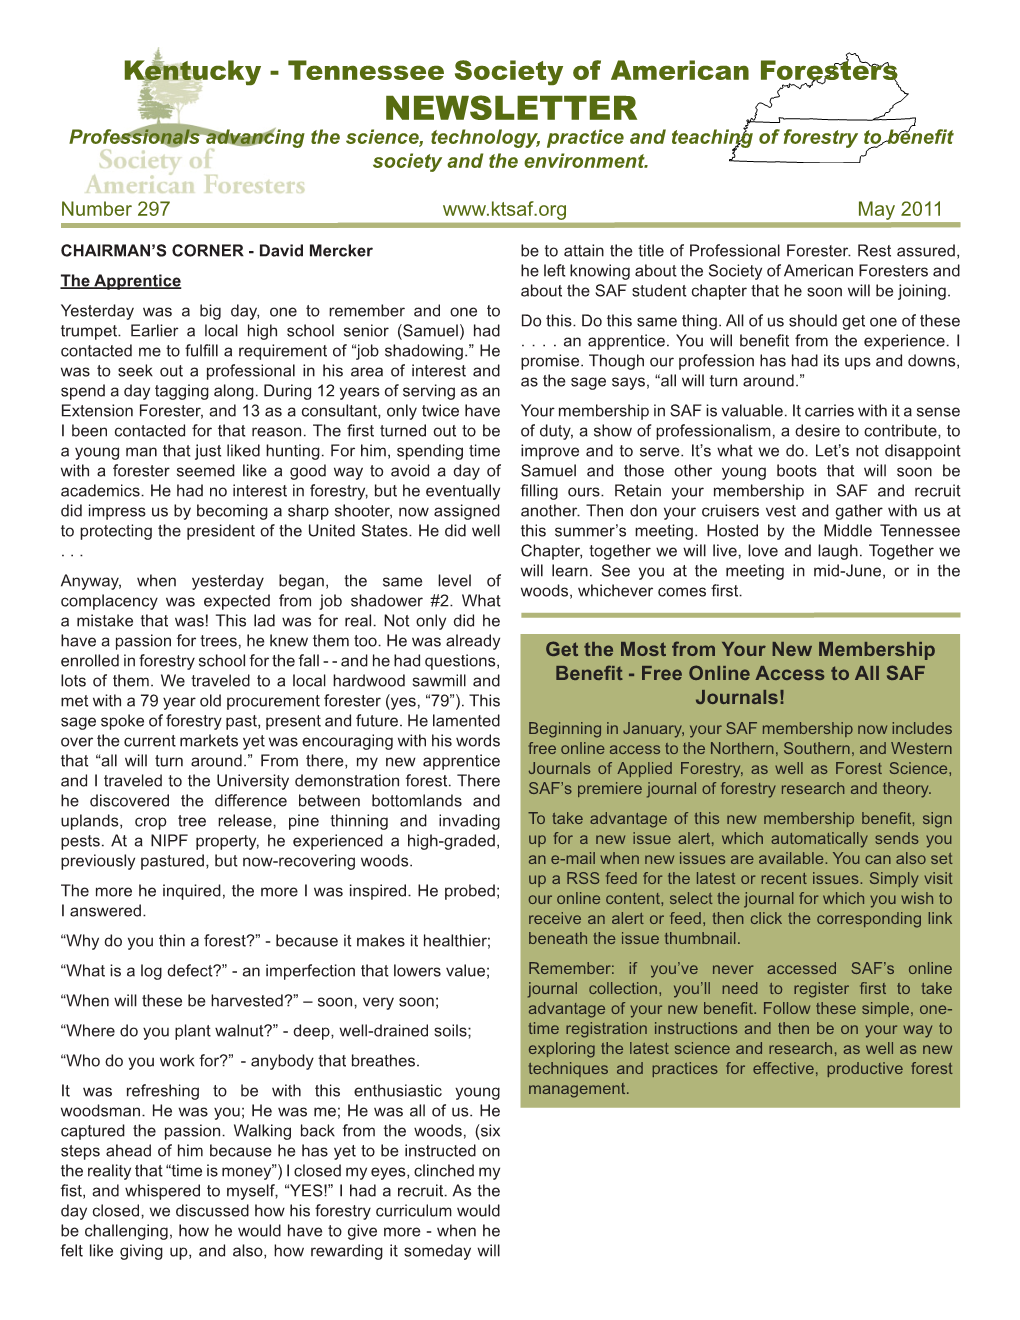 NEWSLETTER Professionals Advancing the Science, Technology, Practice and Teaching of Forestry to Benefit Society and the Environment